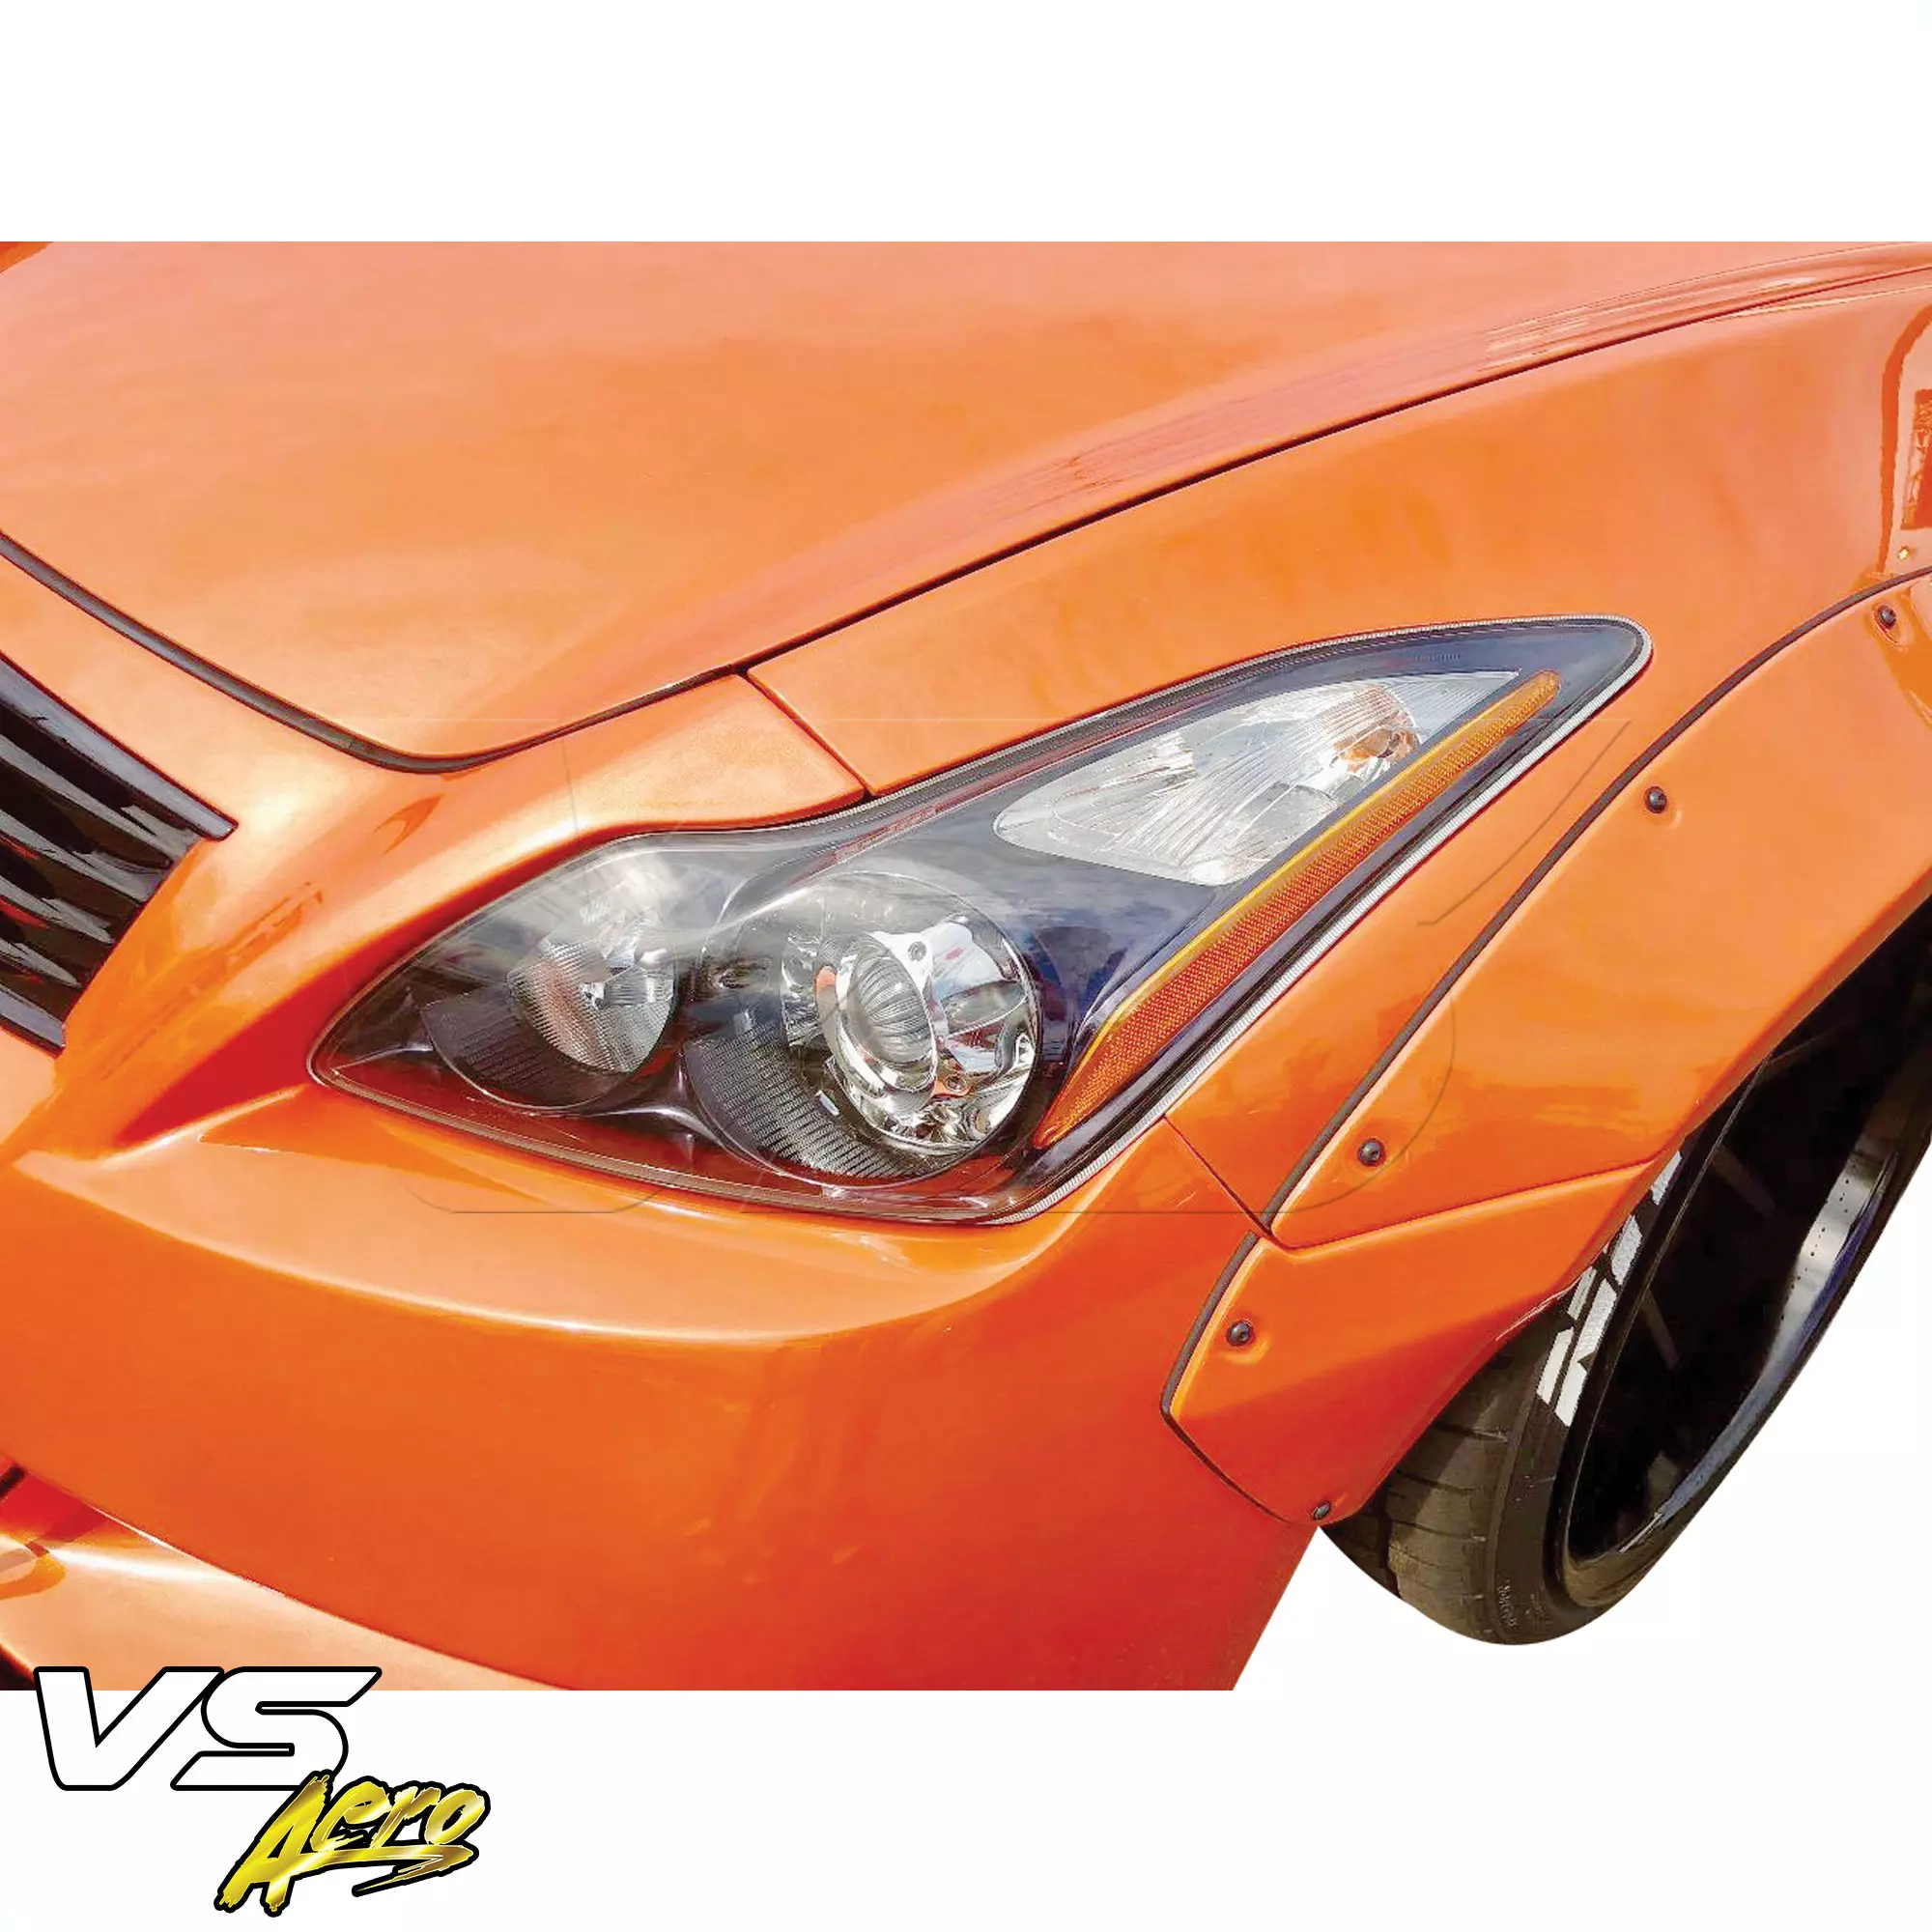 VSaero FRP LBPE Wide Body Fender Flares (front) 4pc > Infiniti G37 Coupe 2008-2015 > 2dr Coupe - Image 9